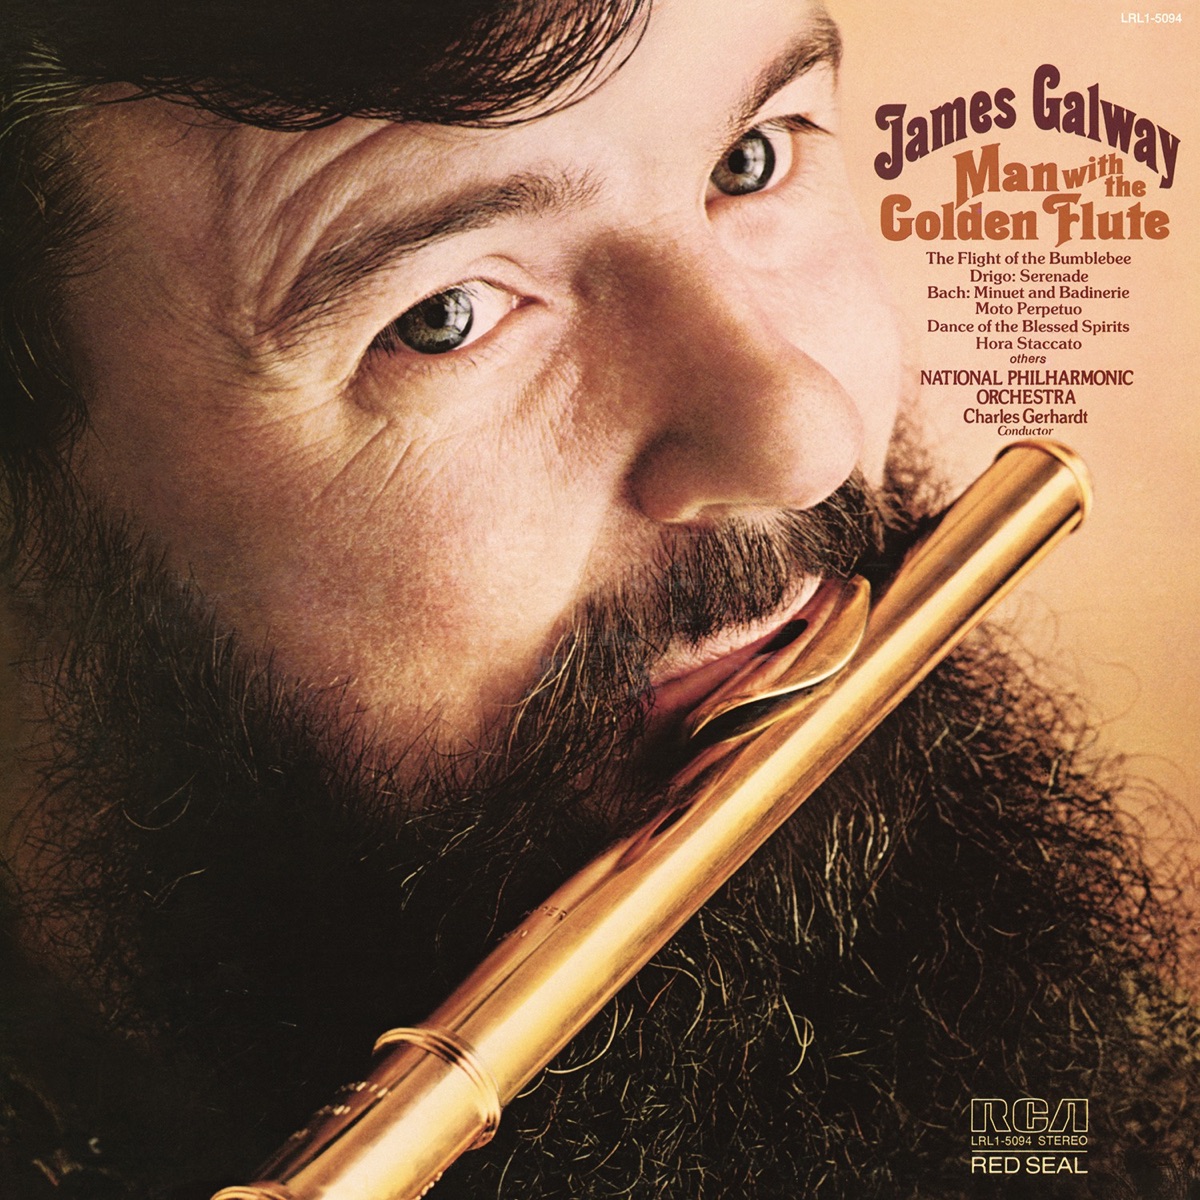 James Galway - The Man with the Golden Flute” álbum de James Galway, Charles  Gerhardt & National Philharmonic Orchestra en Apple Music